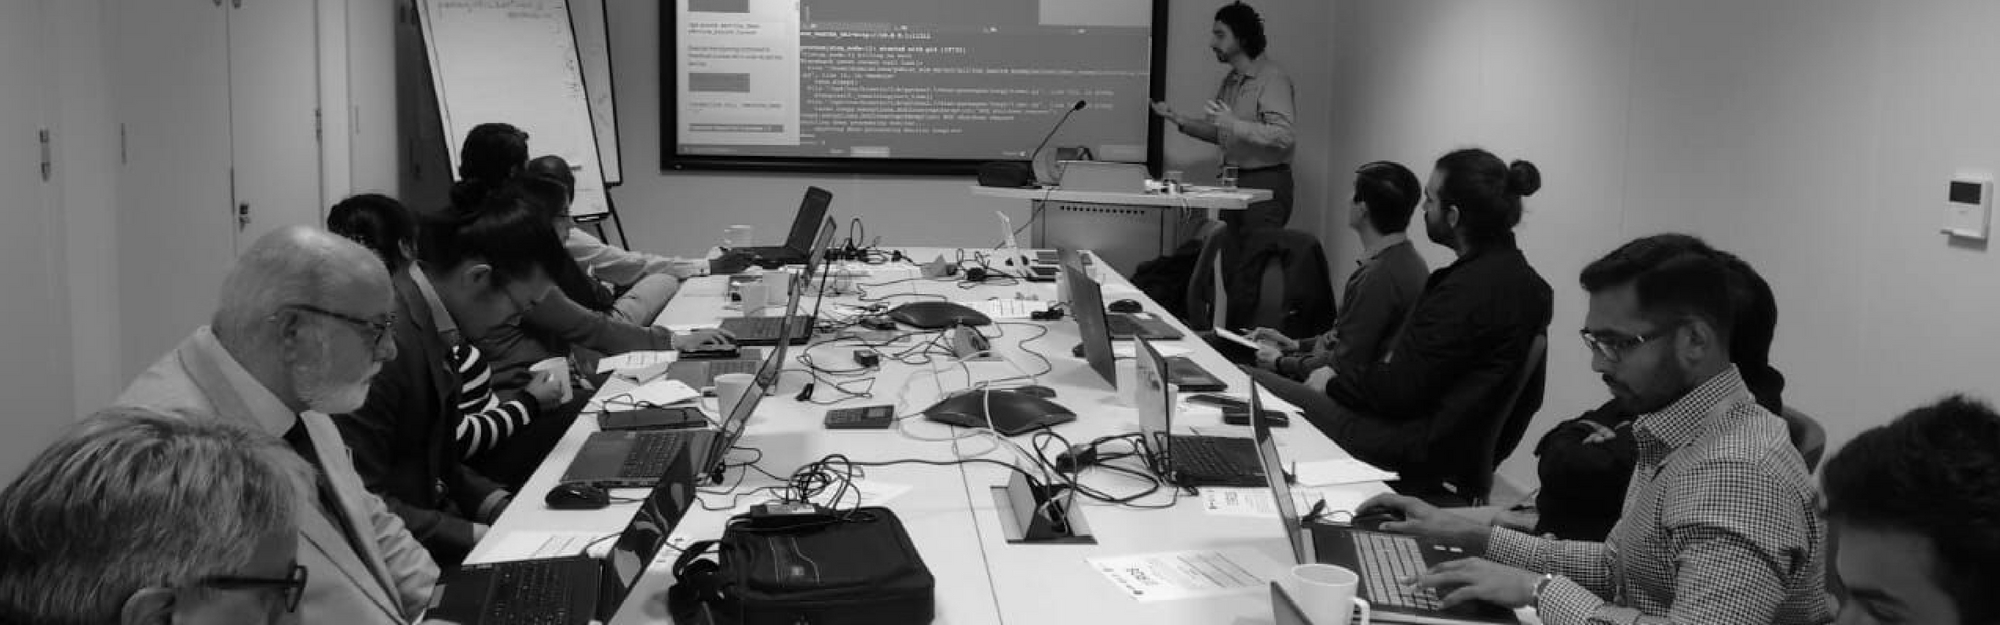 Pleased to announce InnoTecUK’s first ROS workshop in Cambridge was a success